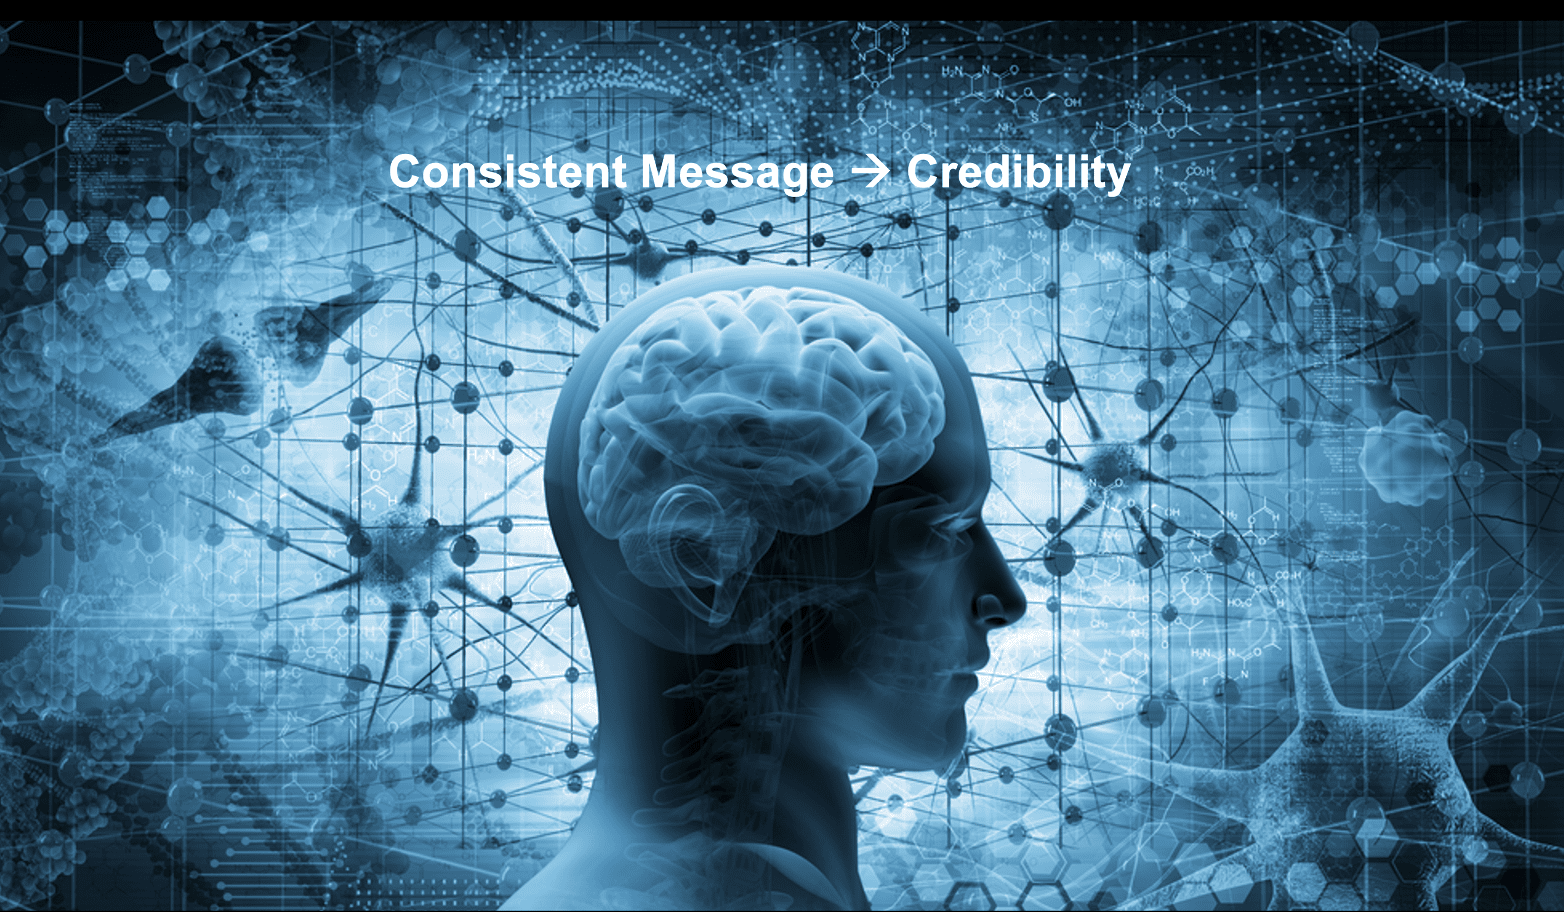 Human brain with test: consistency = credibility